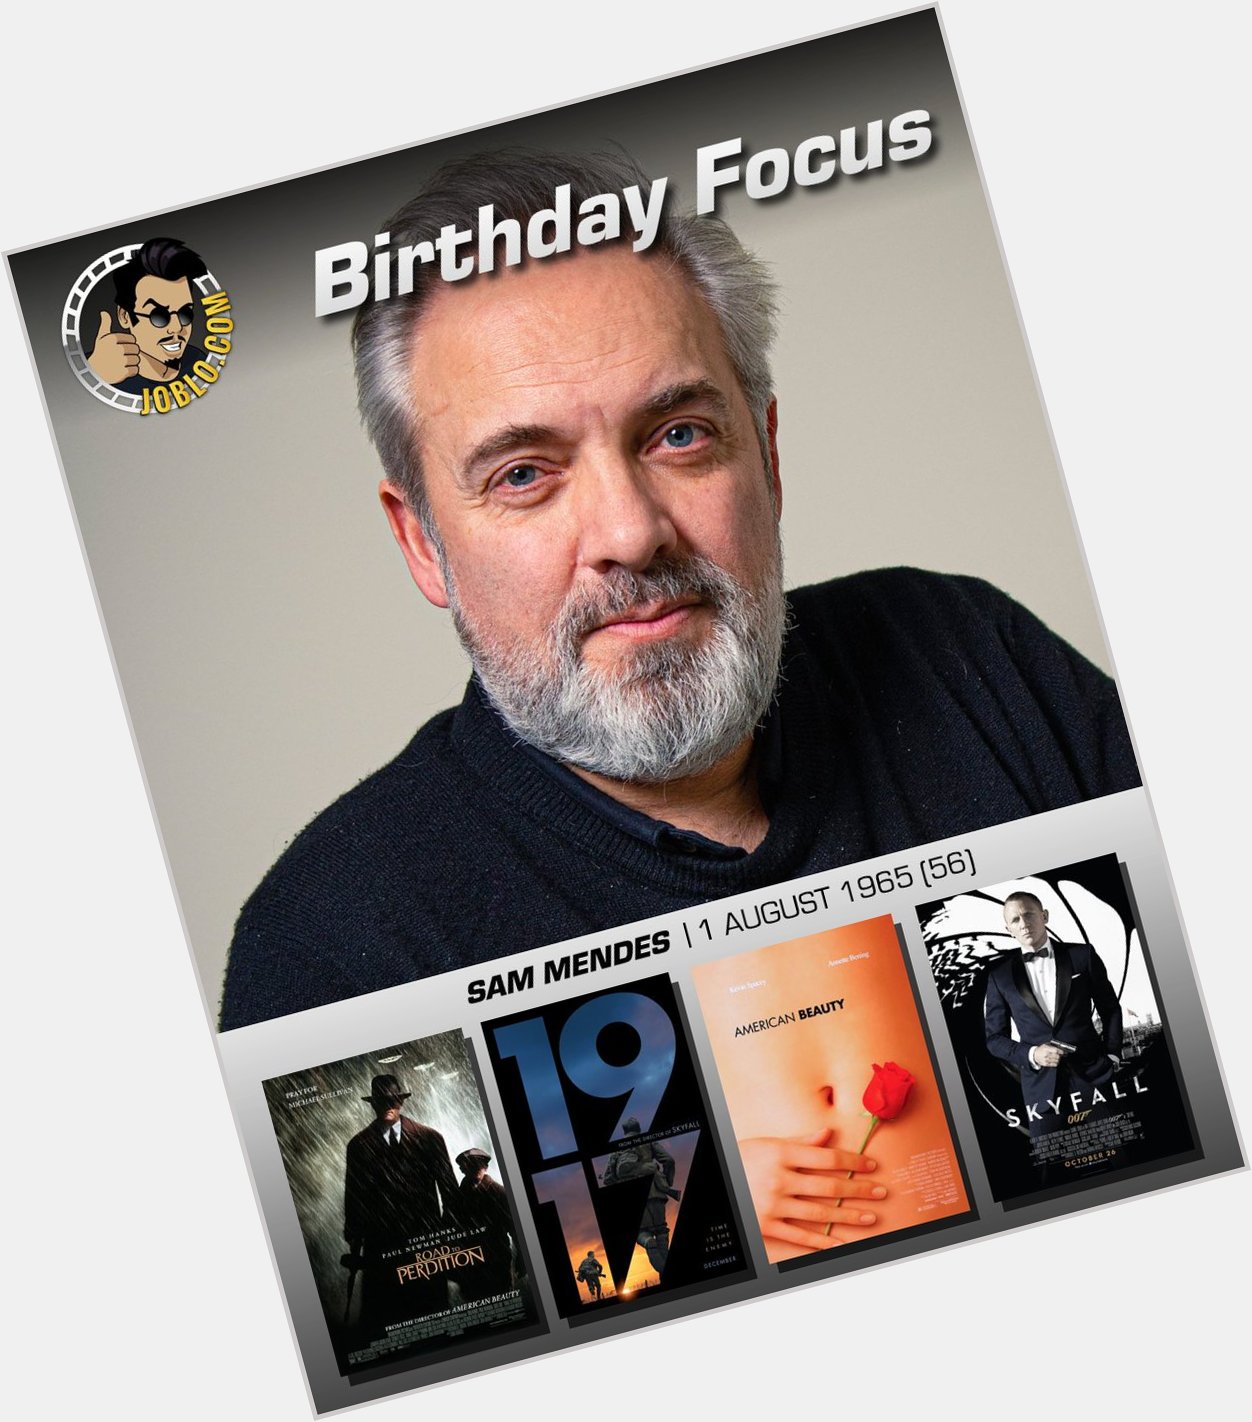 Wishing a very happy 56th birthday to the great filmmaker, Sam Mendes!

What is your favorite film of his? 